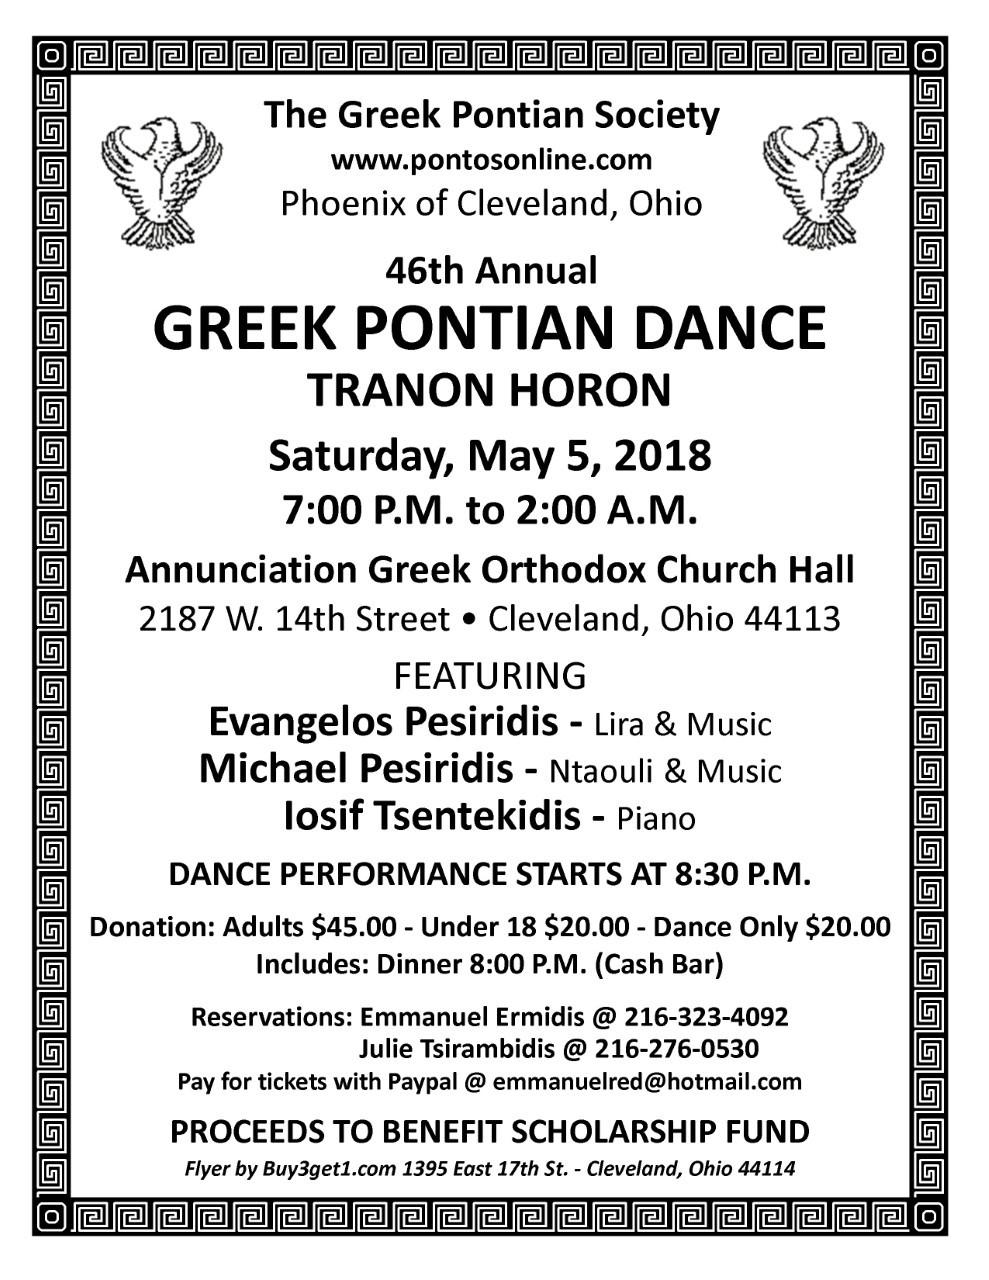 Other Events: METROPOLIS GREEK LANGUAGE FESTIVAL Sat., April 14 at Sts. Constantine and Helen Cathedral, Cleveland Heights, 11 a.m.